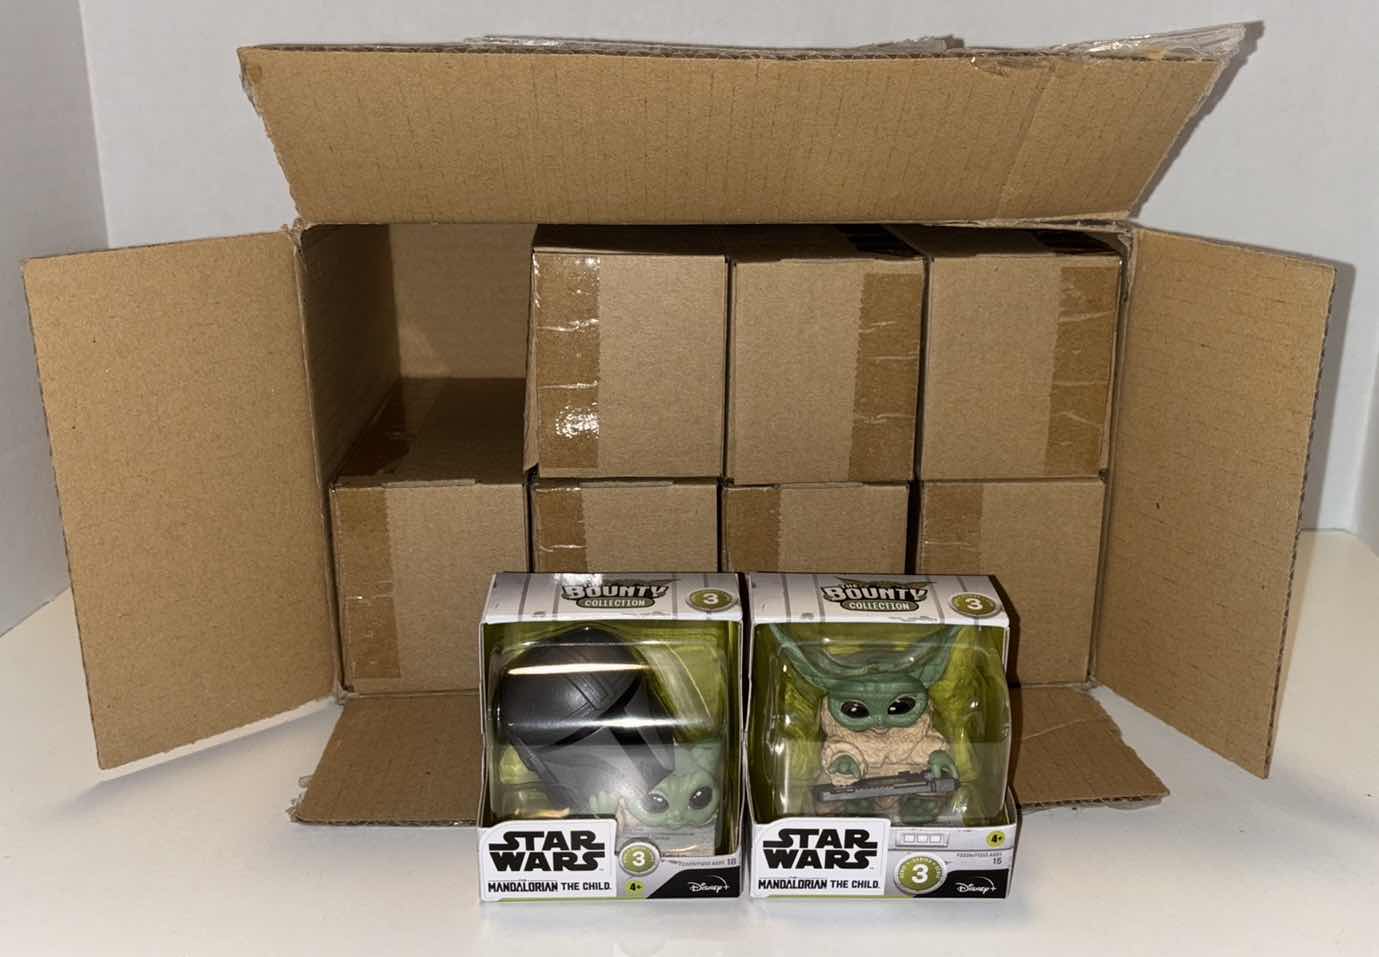 Photo 1 of NEW STAR WARS THE BOUNTY COLLECTION SERIES 3 THE CHILD POSED COLLECTIBLE 2-PACK FIGURES, “HELMET PEEKING” & “DATAPAD TABLET” (CASE OF 8)